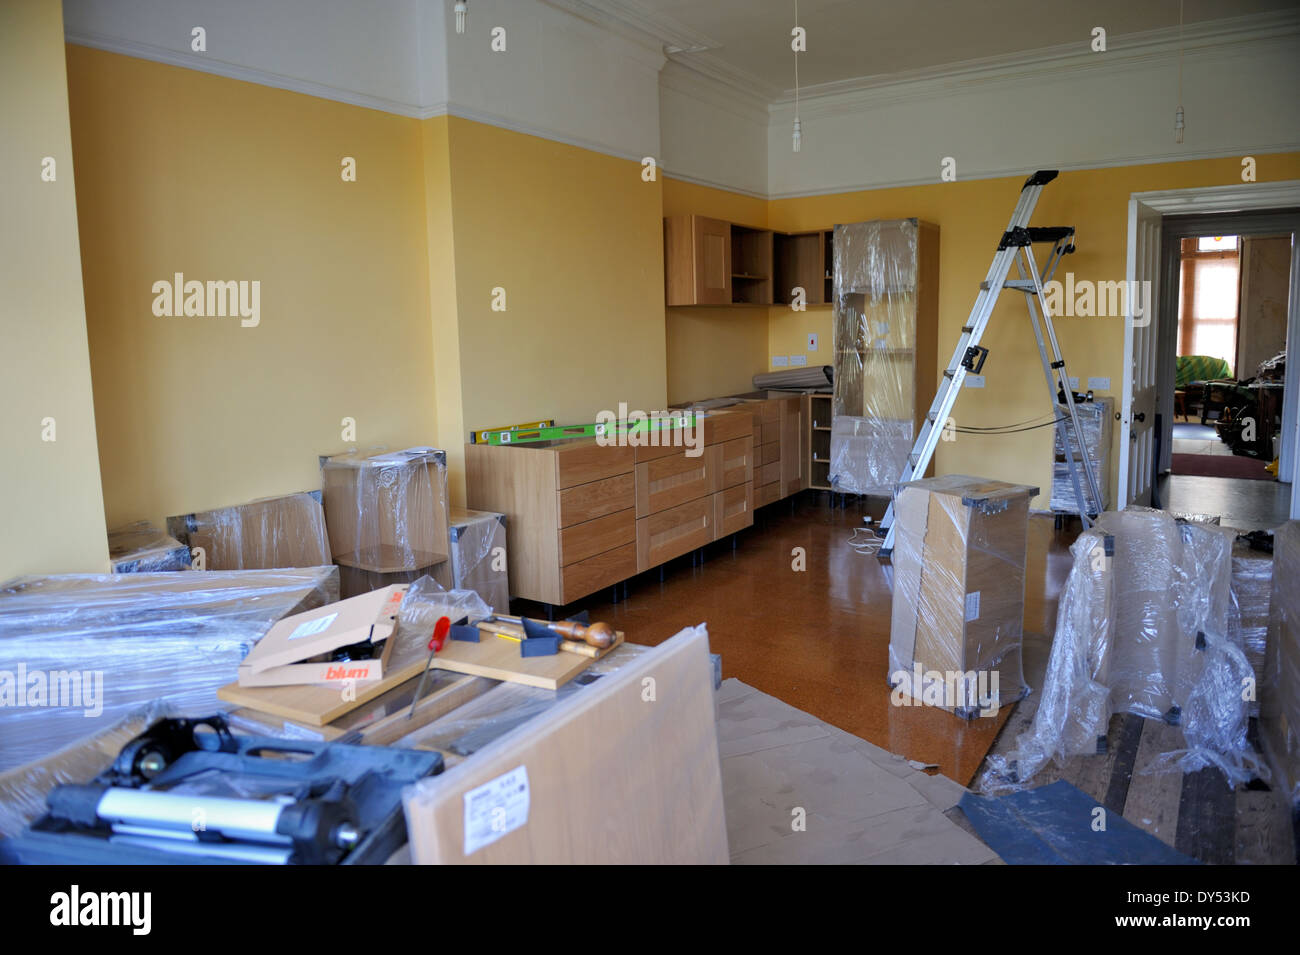 Building a kitchen from ready made units. Laying out, installing and levelling at the start. Stock Photo